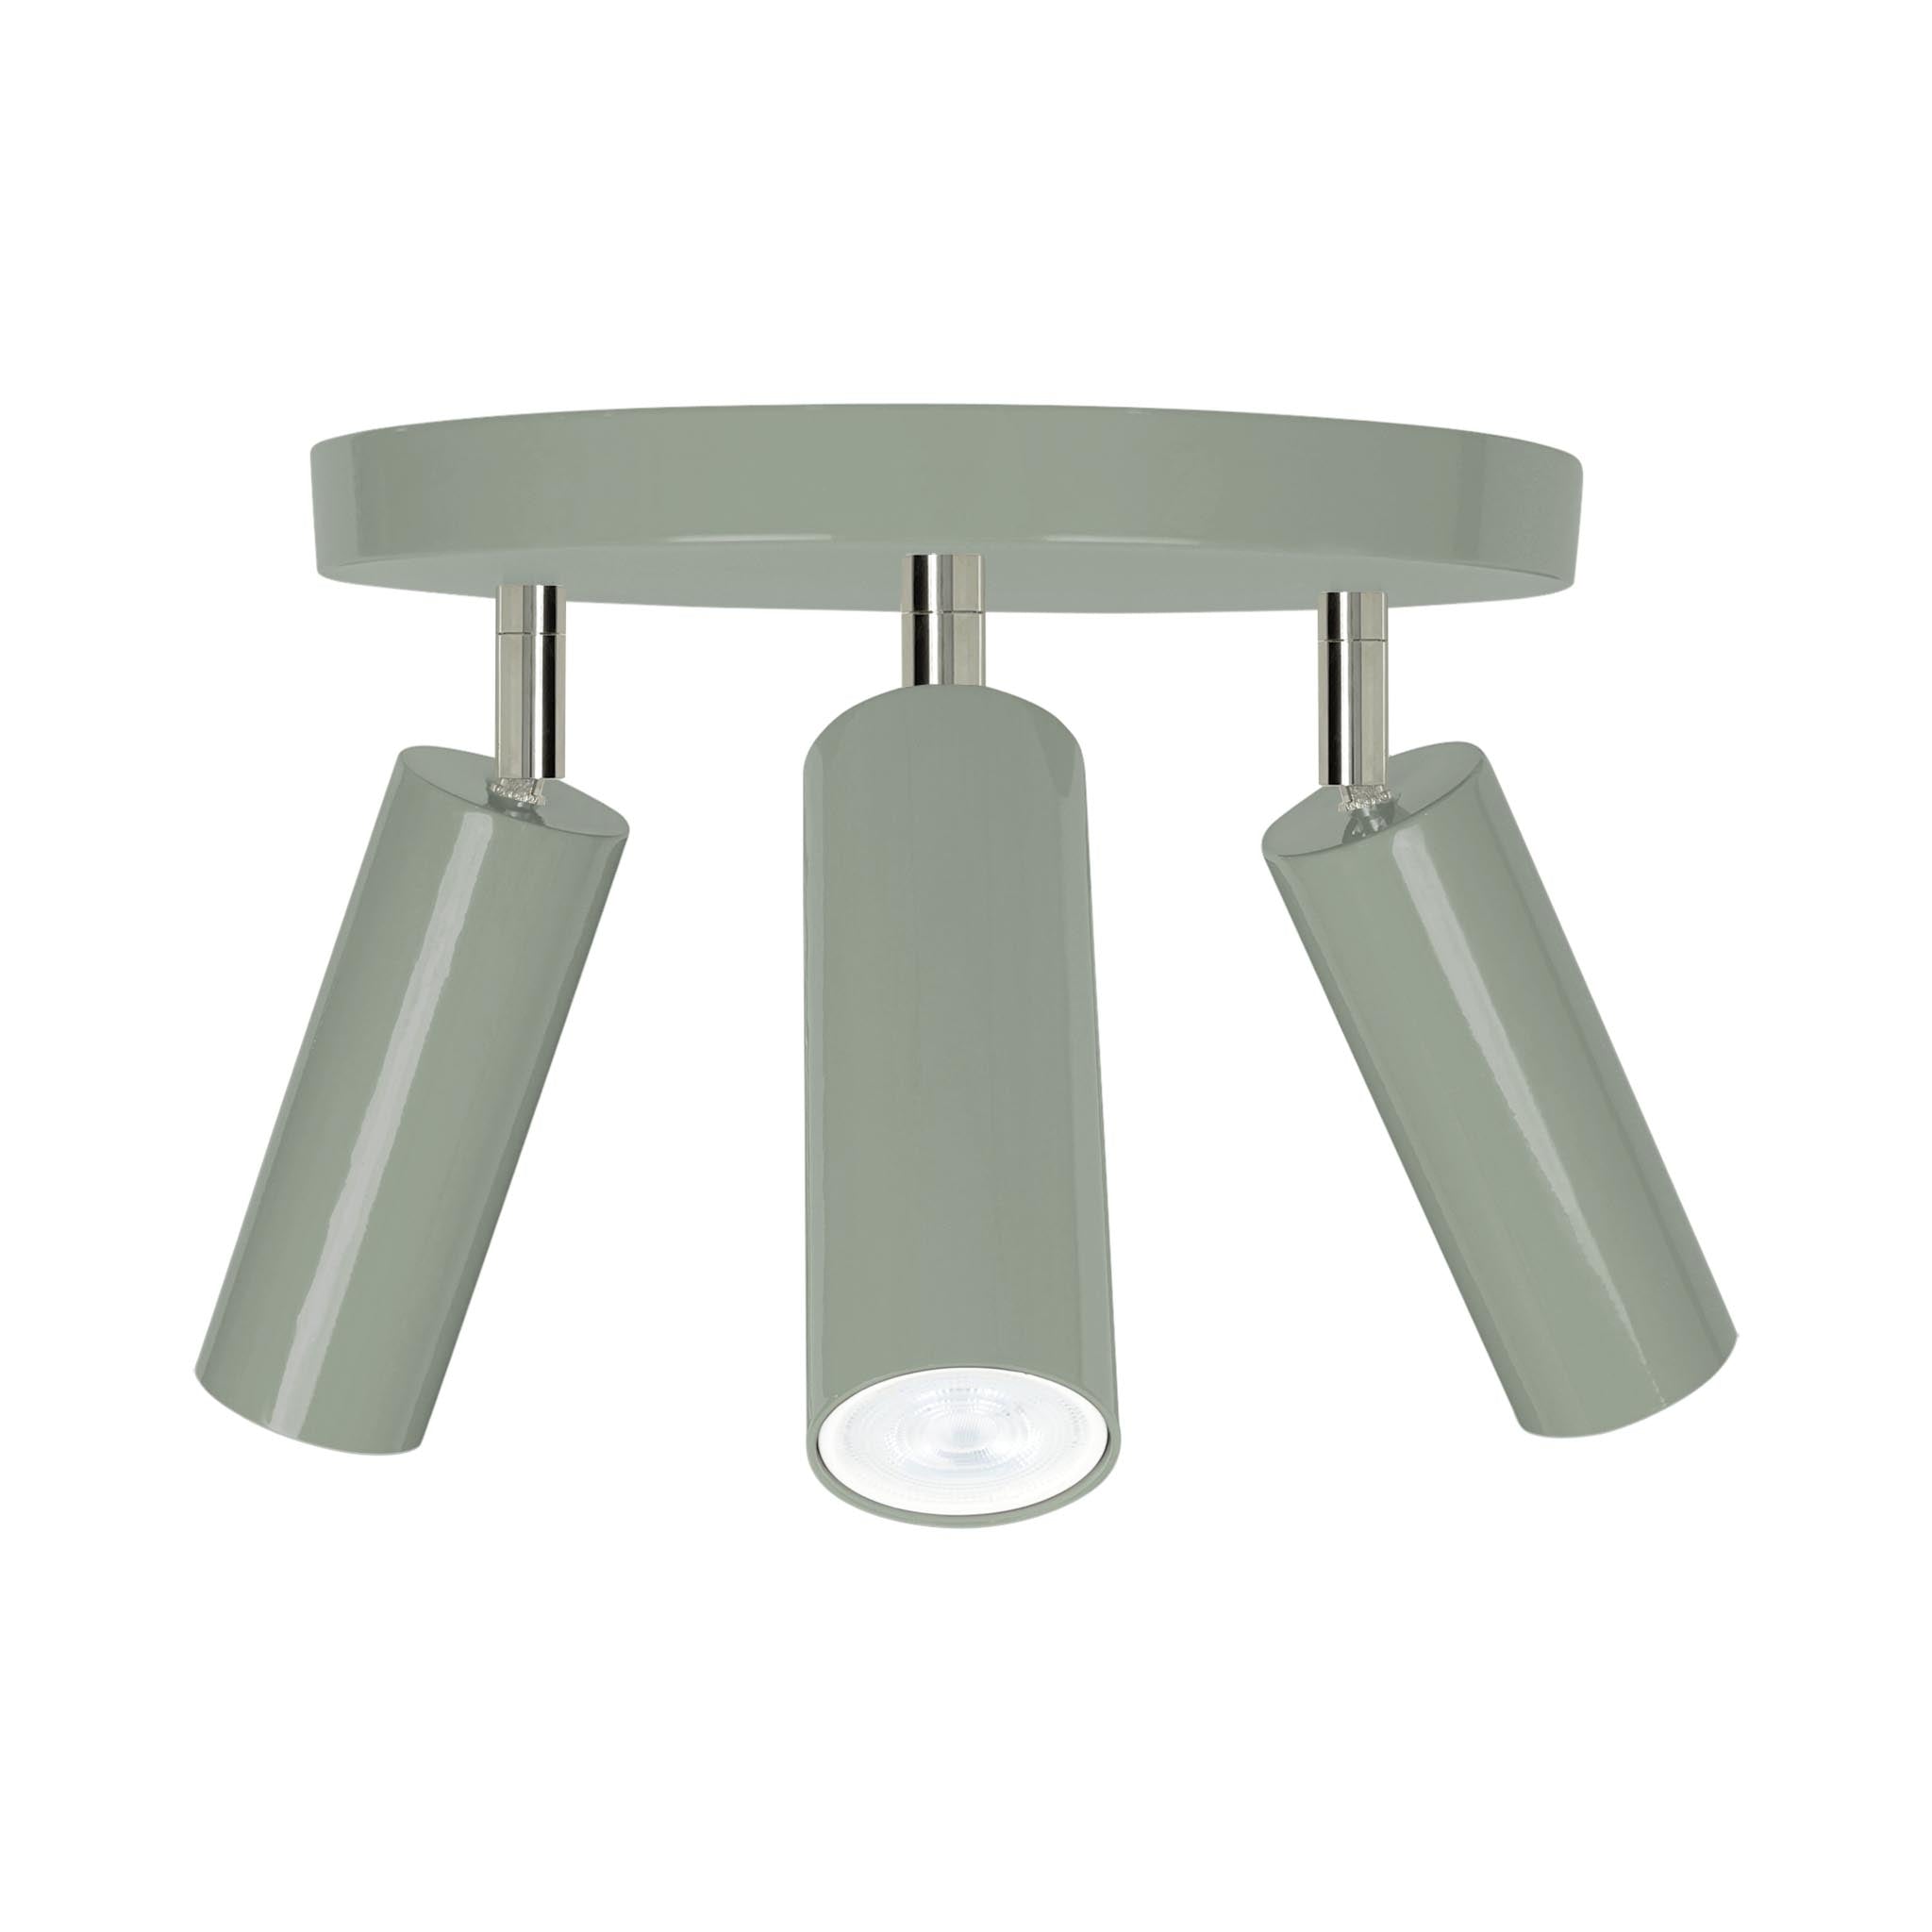 Nickel and spa color Pose flush mount Dutton Brown lighting